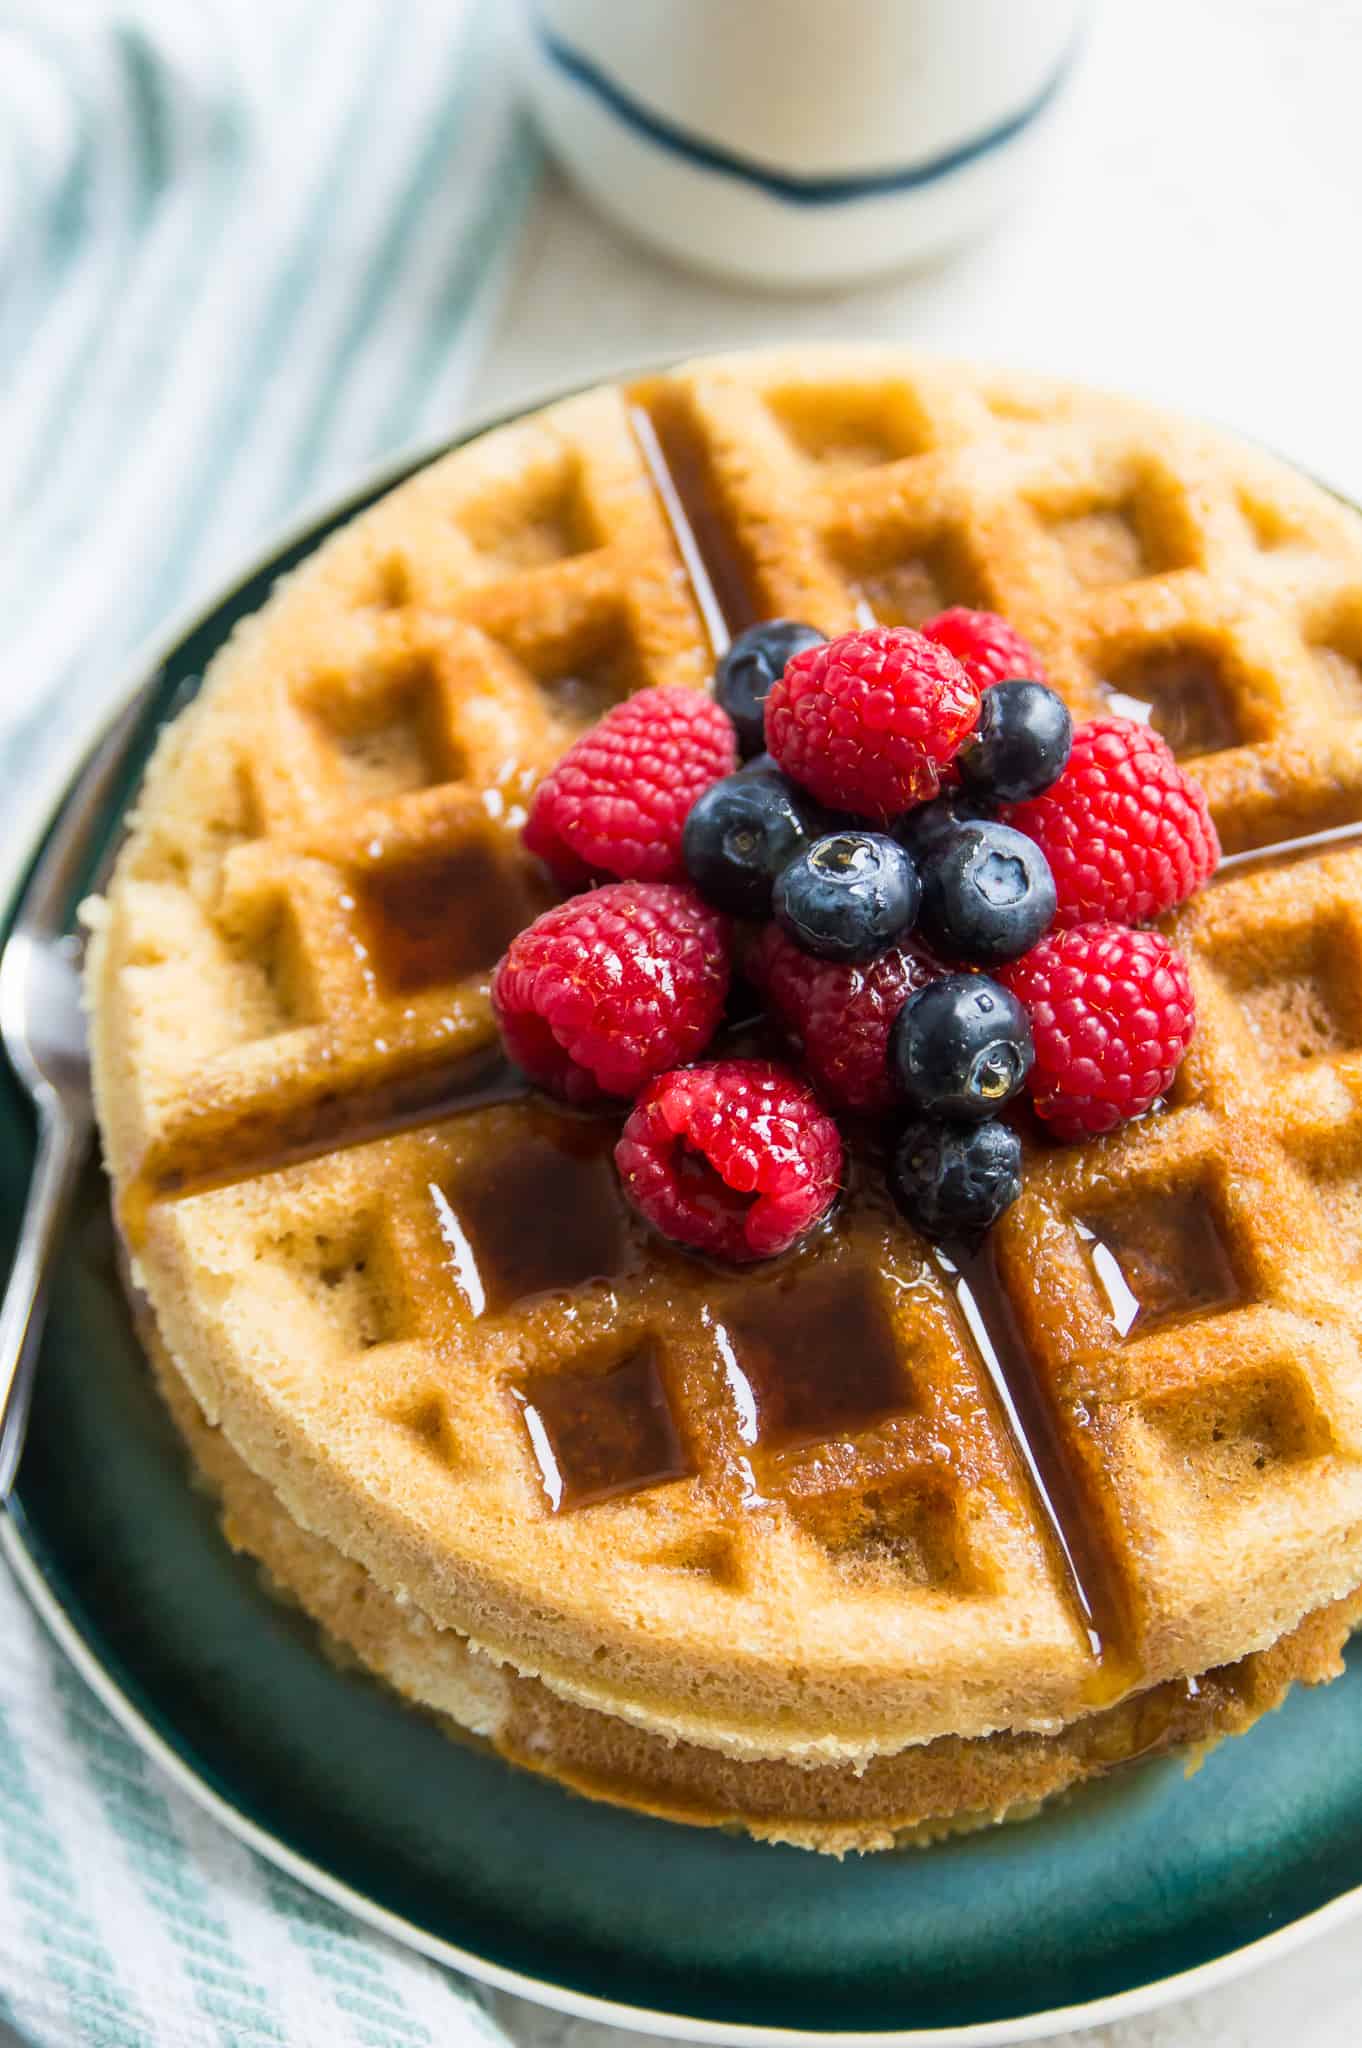 A stack of paleo waffles topped with blueberries, raspberries and syrup.